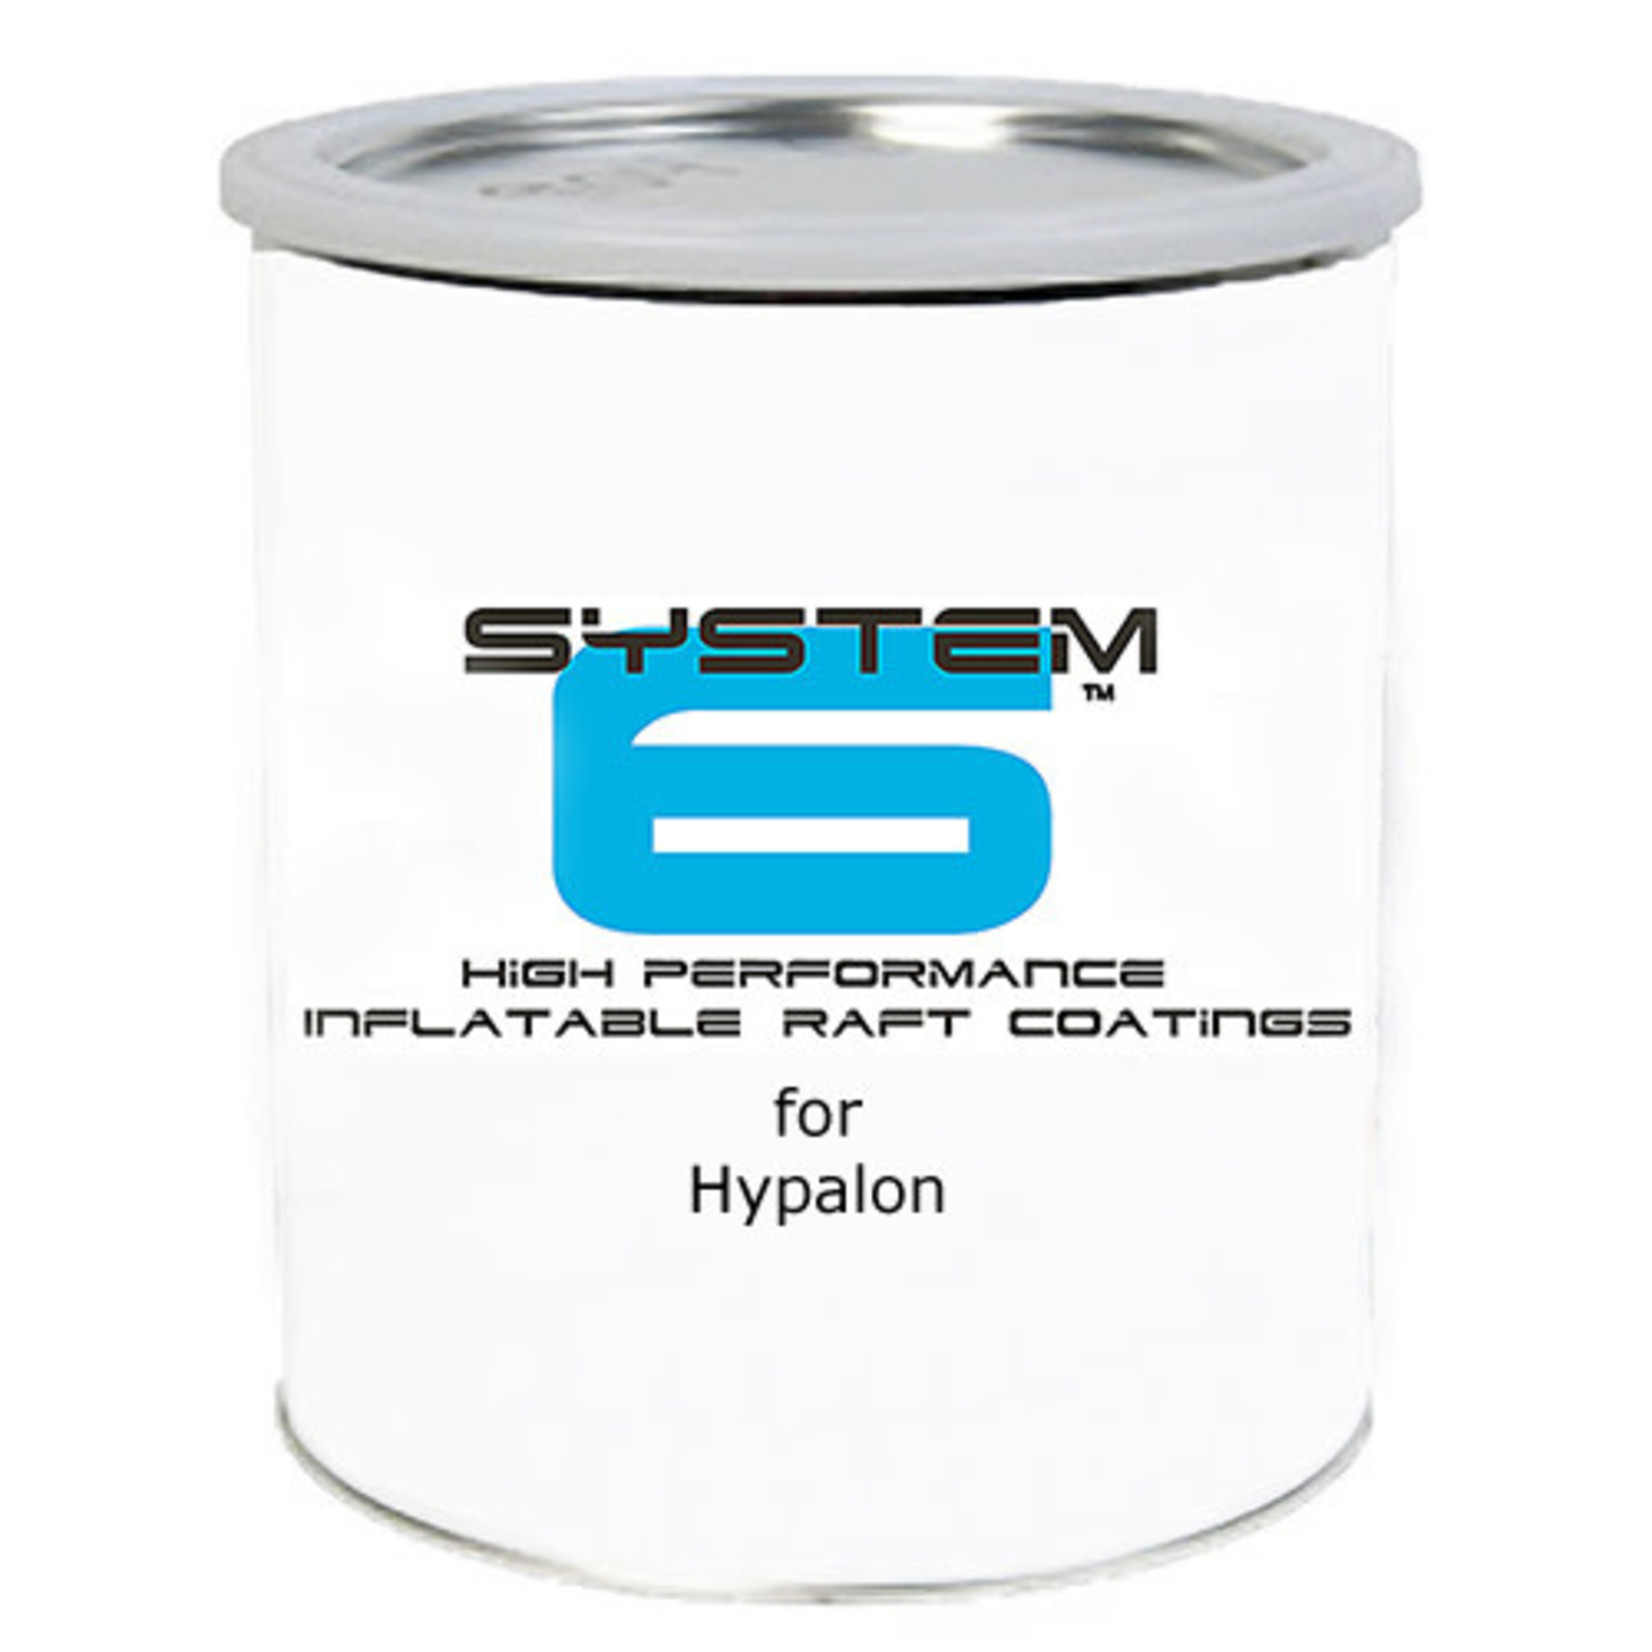 Man of Rubber System 6 Urethane Coating for Hypalon Rafts & Inflatable Boats